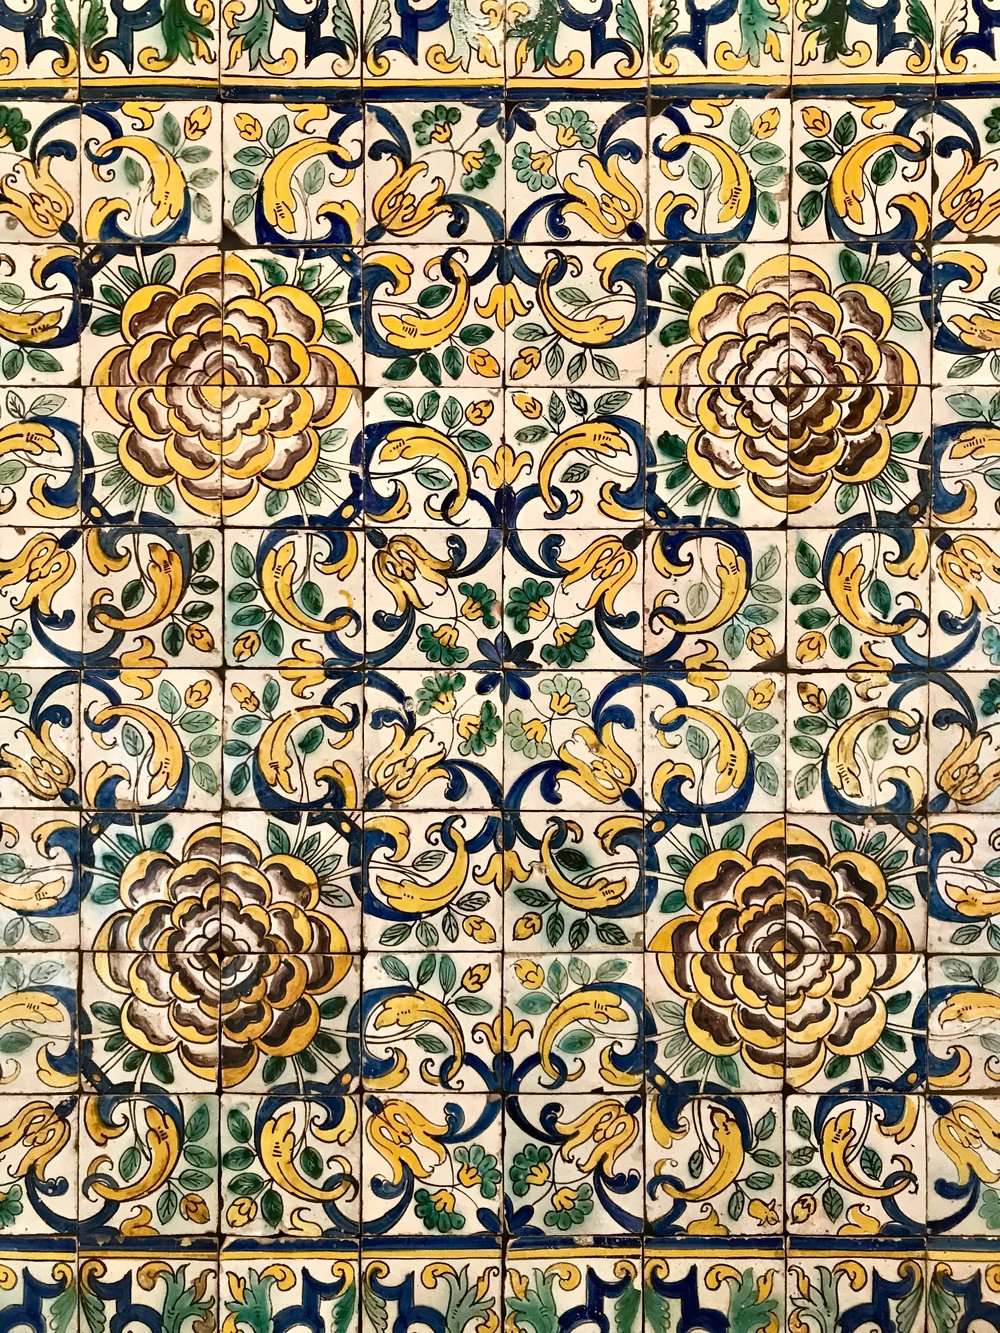 Why are the buildings in Portugal covered in tile?